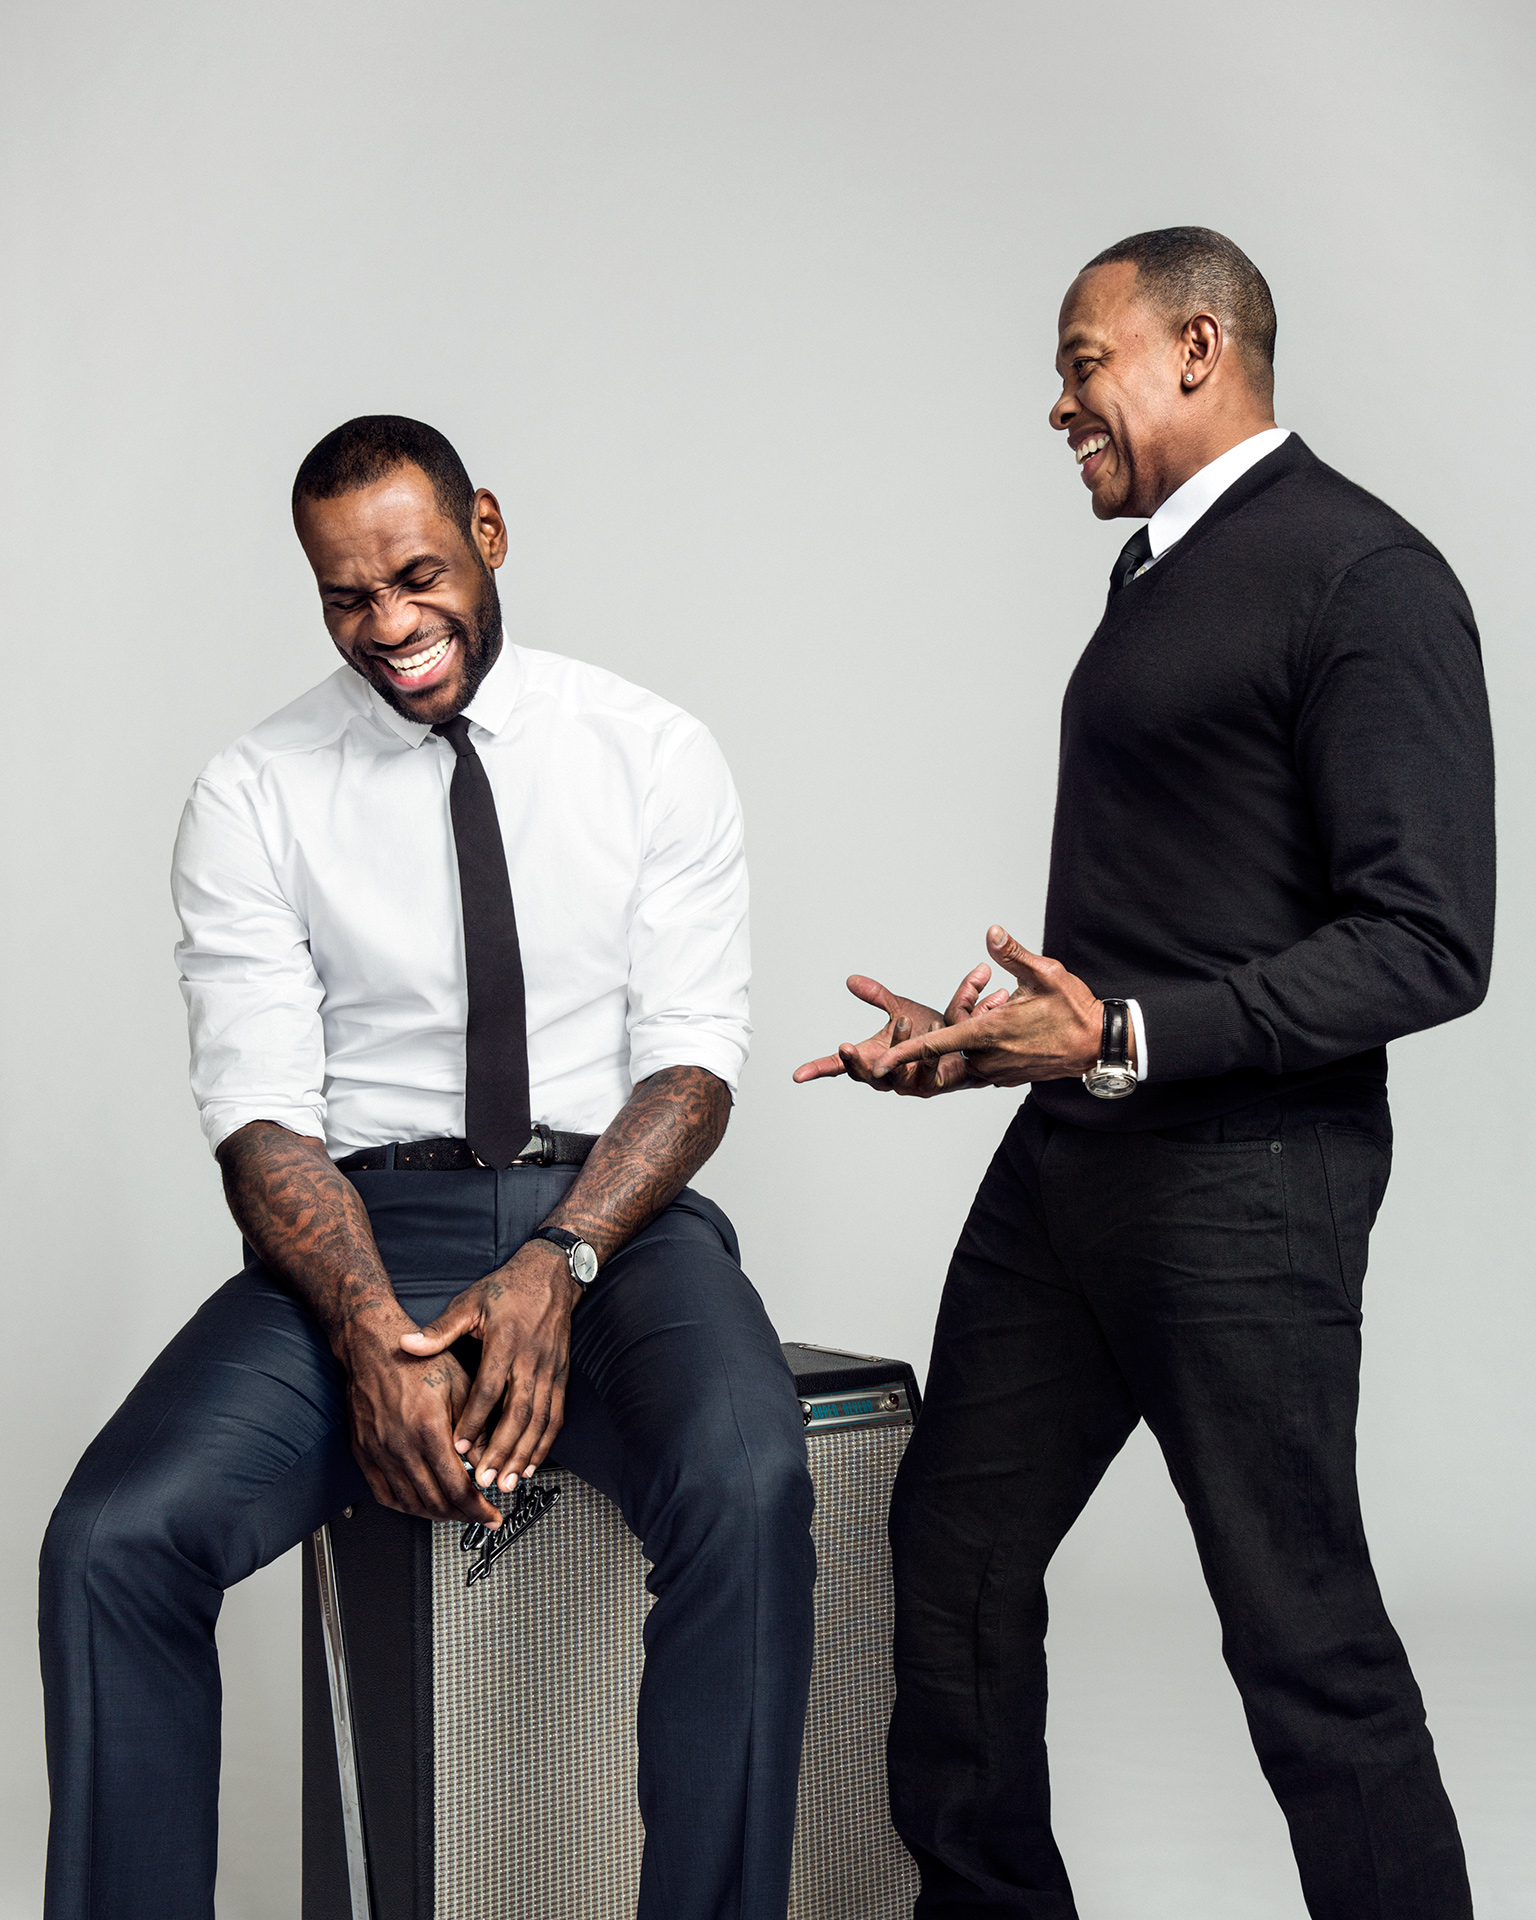 On the set - LeBron James and Dr. Dre 